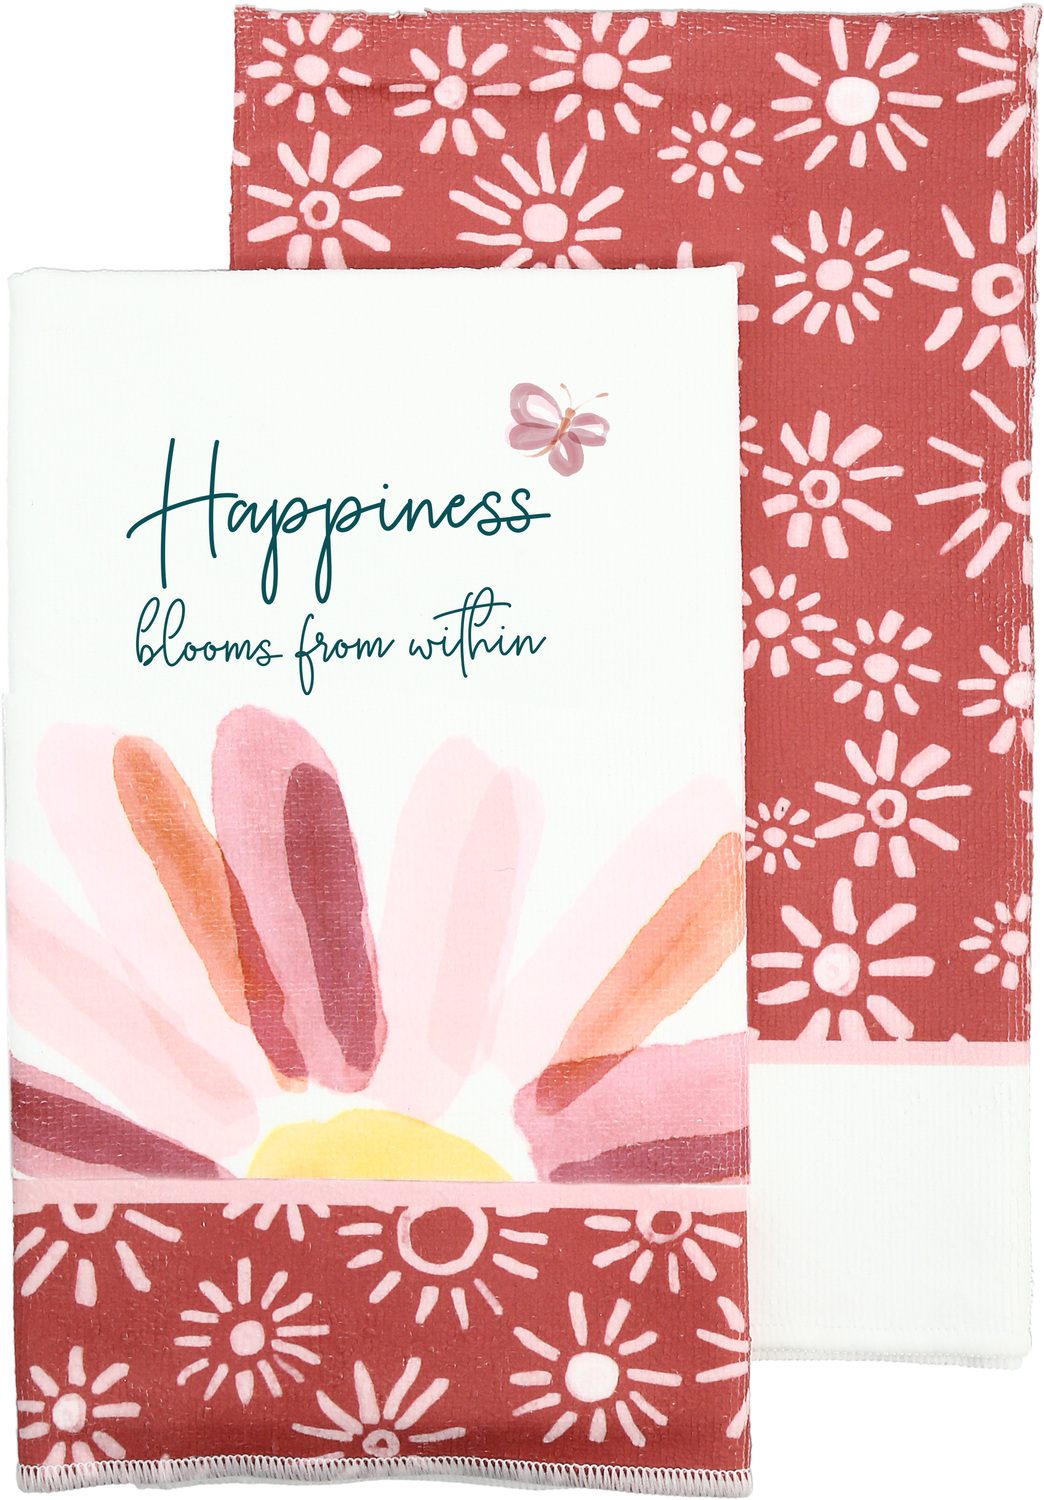 Happiness by Rosy Heart - Happiness - Tea Towel Gift Set (2 - 19.75" x 27.5")